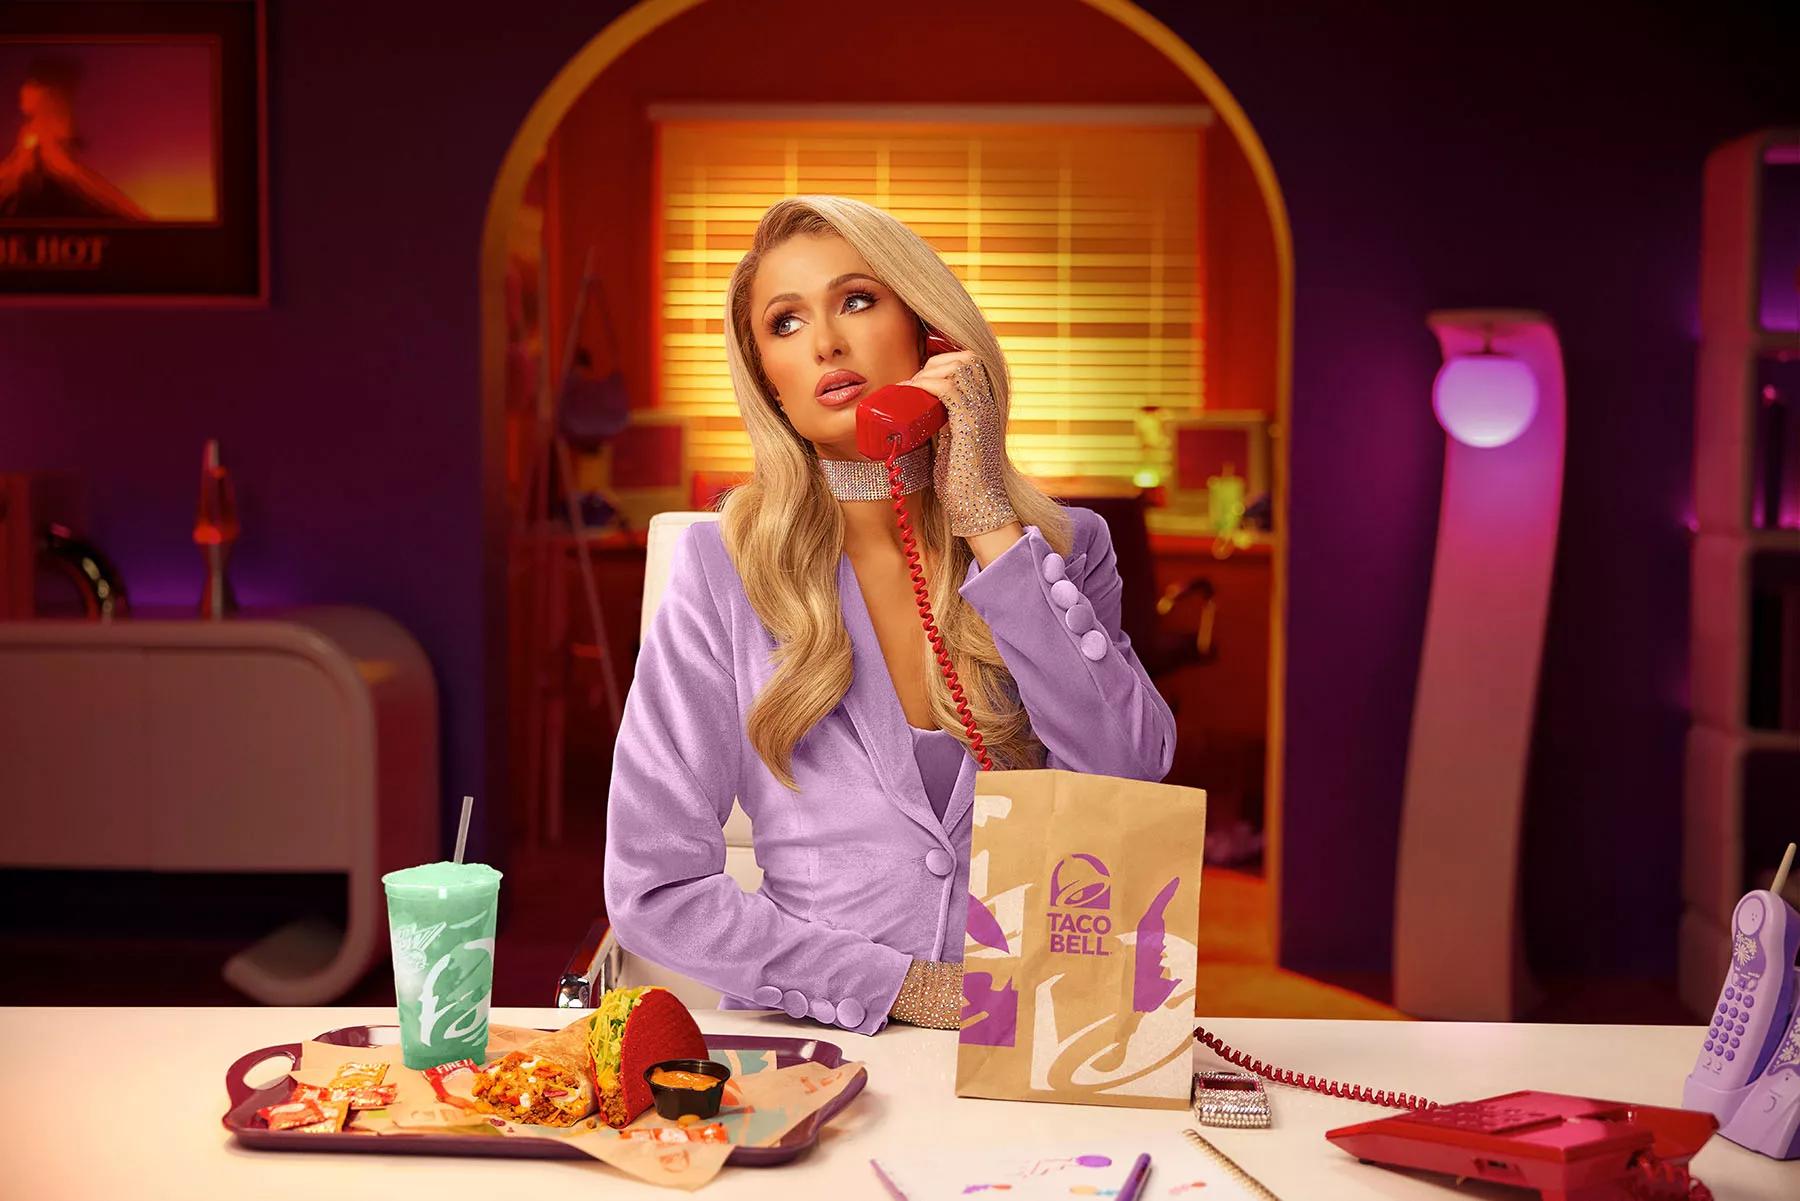 Taco Bell® Turns Up The Heat With Paris Hilton And The Fan Favorite Return Of The Volcano Menu